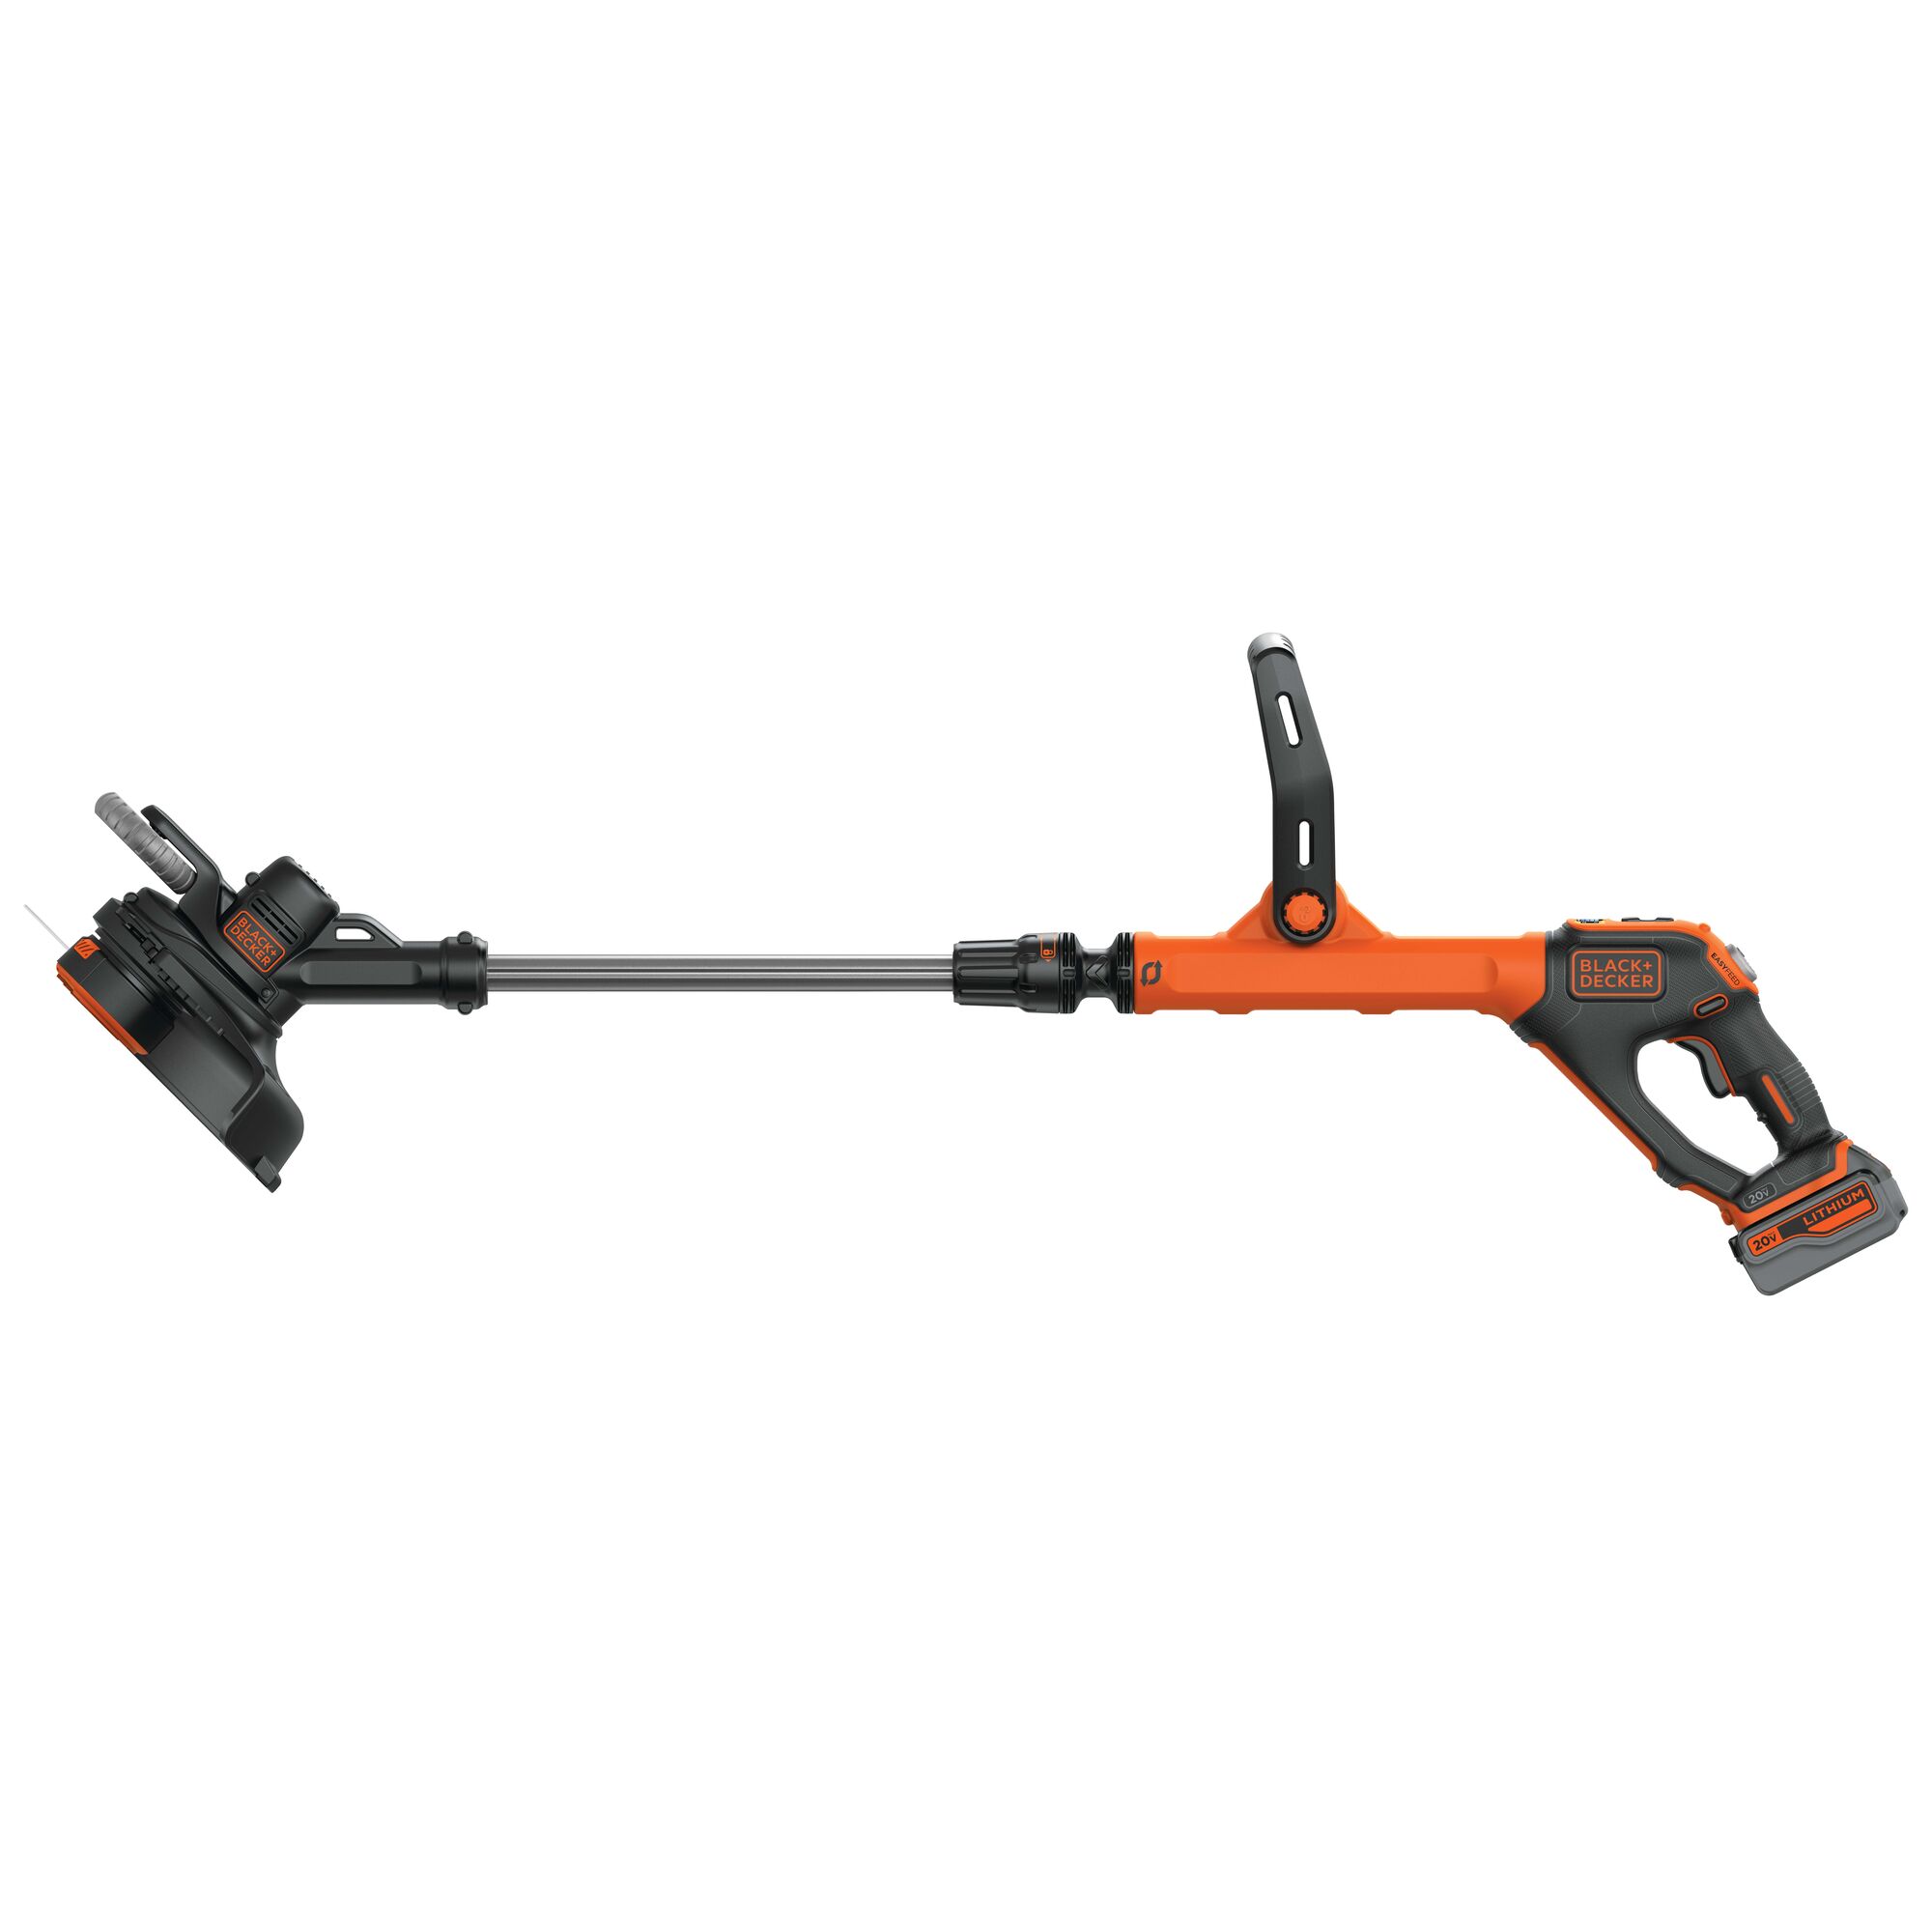 Profile view of 20V Max Lithium Easyfeed string Trimmer/Edger